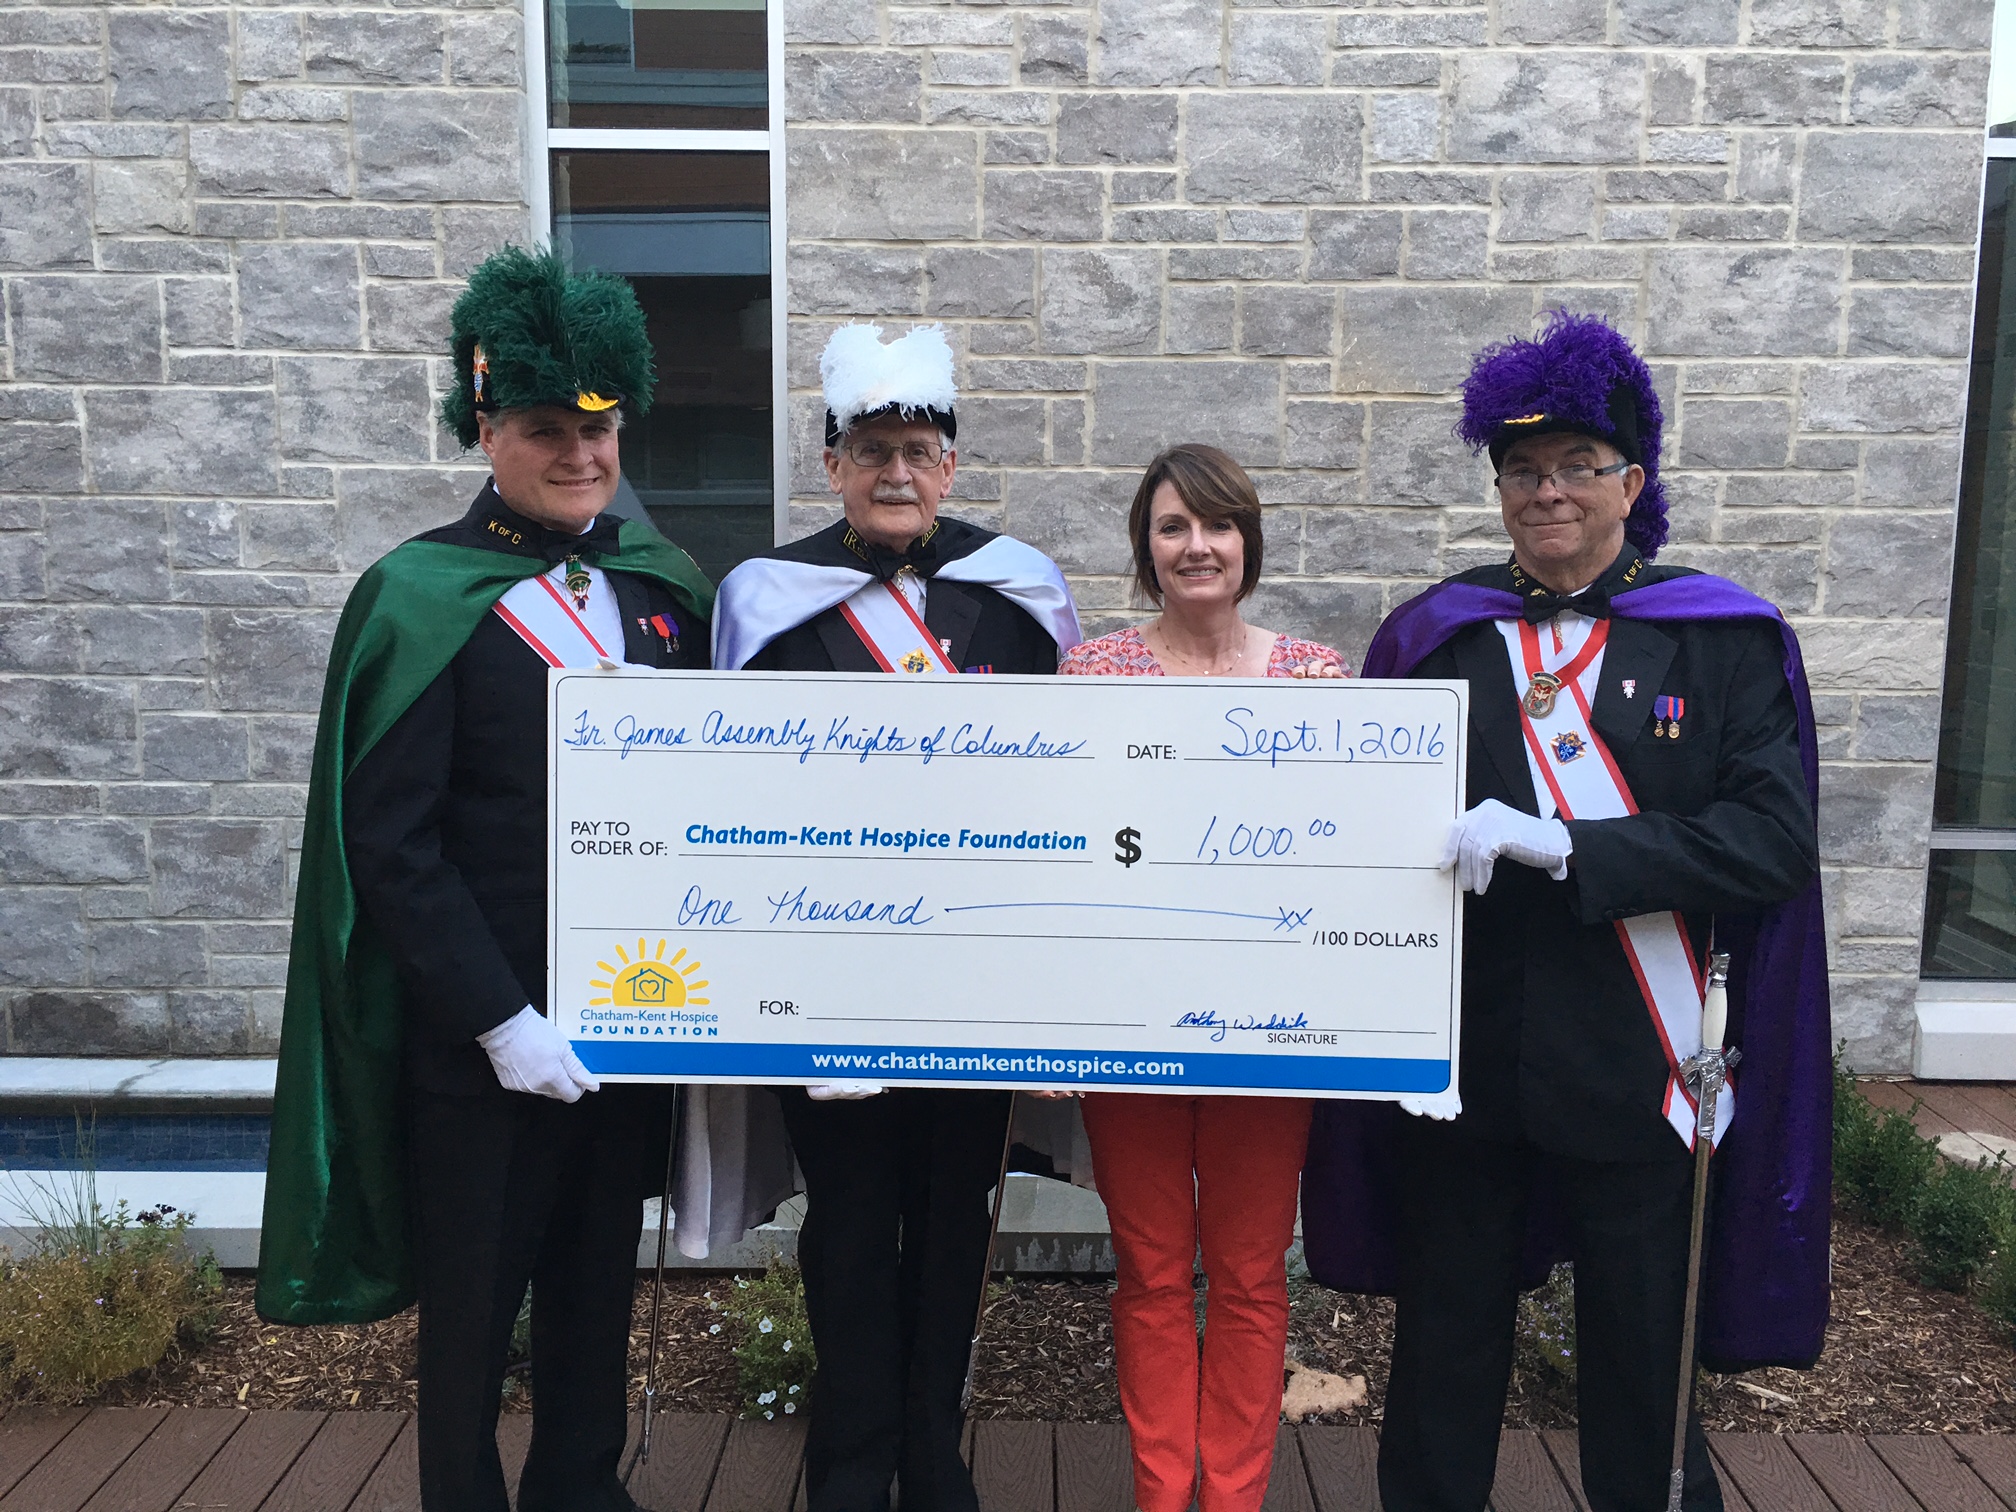 The Fr. James Assembly Knights of Columbus recently donated $1,000 to the Chatham-Kent Hospice Foundation to be used for ongoing operating expenses.  Shown here making the presentation (left to right) are  Paul Johnston – Faithful Navigator, Don Smith – Past Faithful Navigator, Jodi Maroney – Chatham-Kent Hospice Foundation Executive Director, Anthony Waddick – Faithful  Commander. 